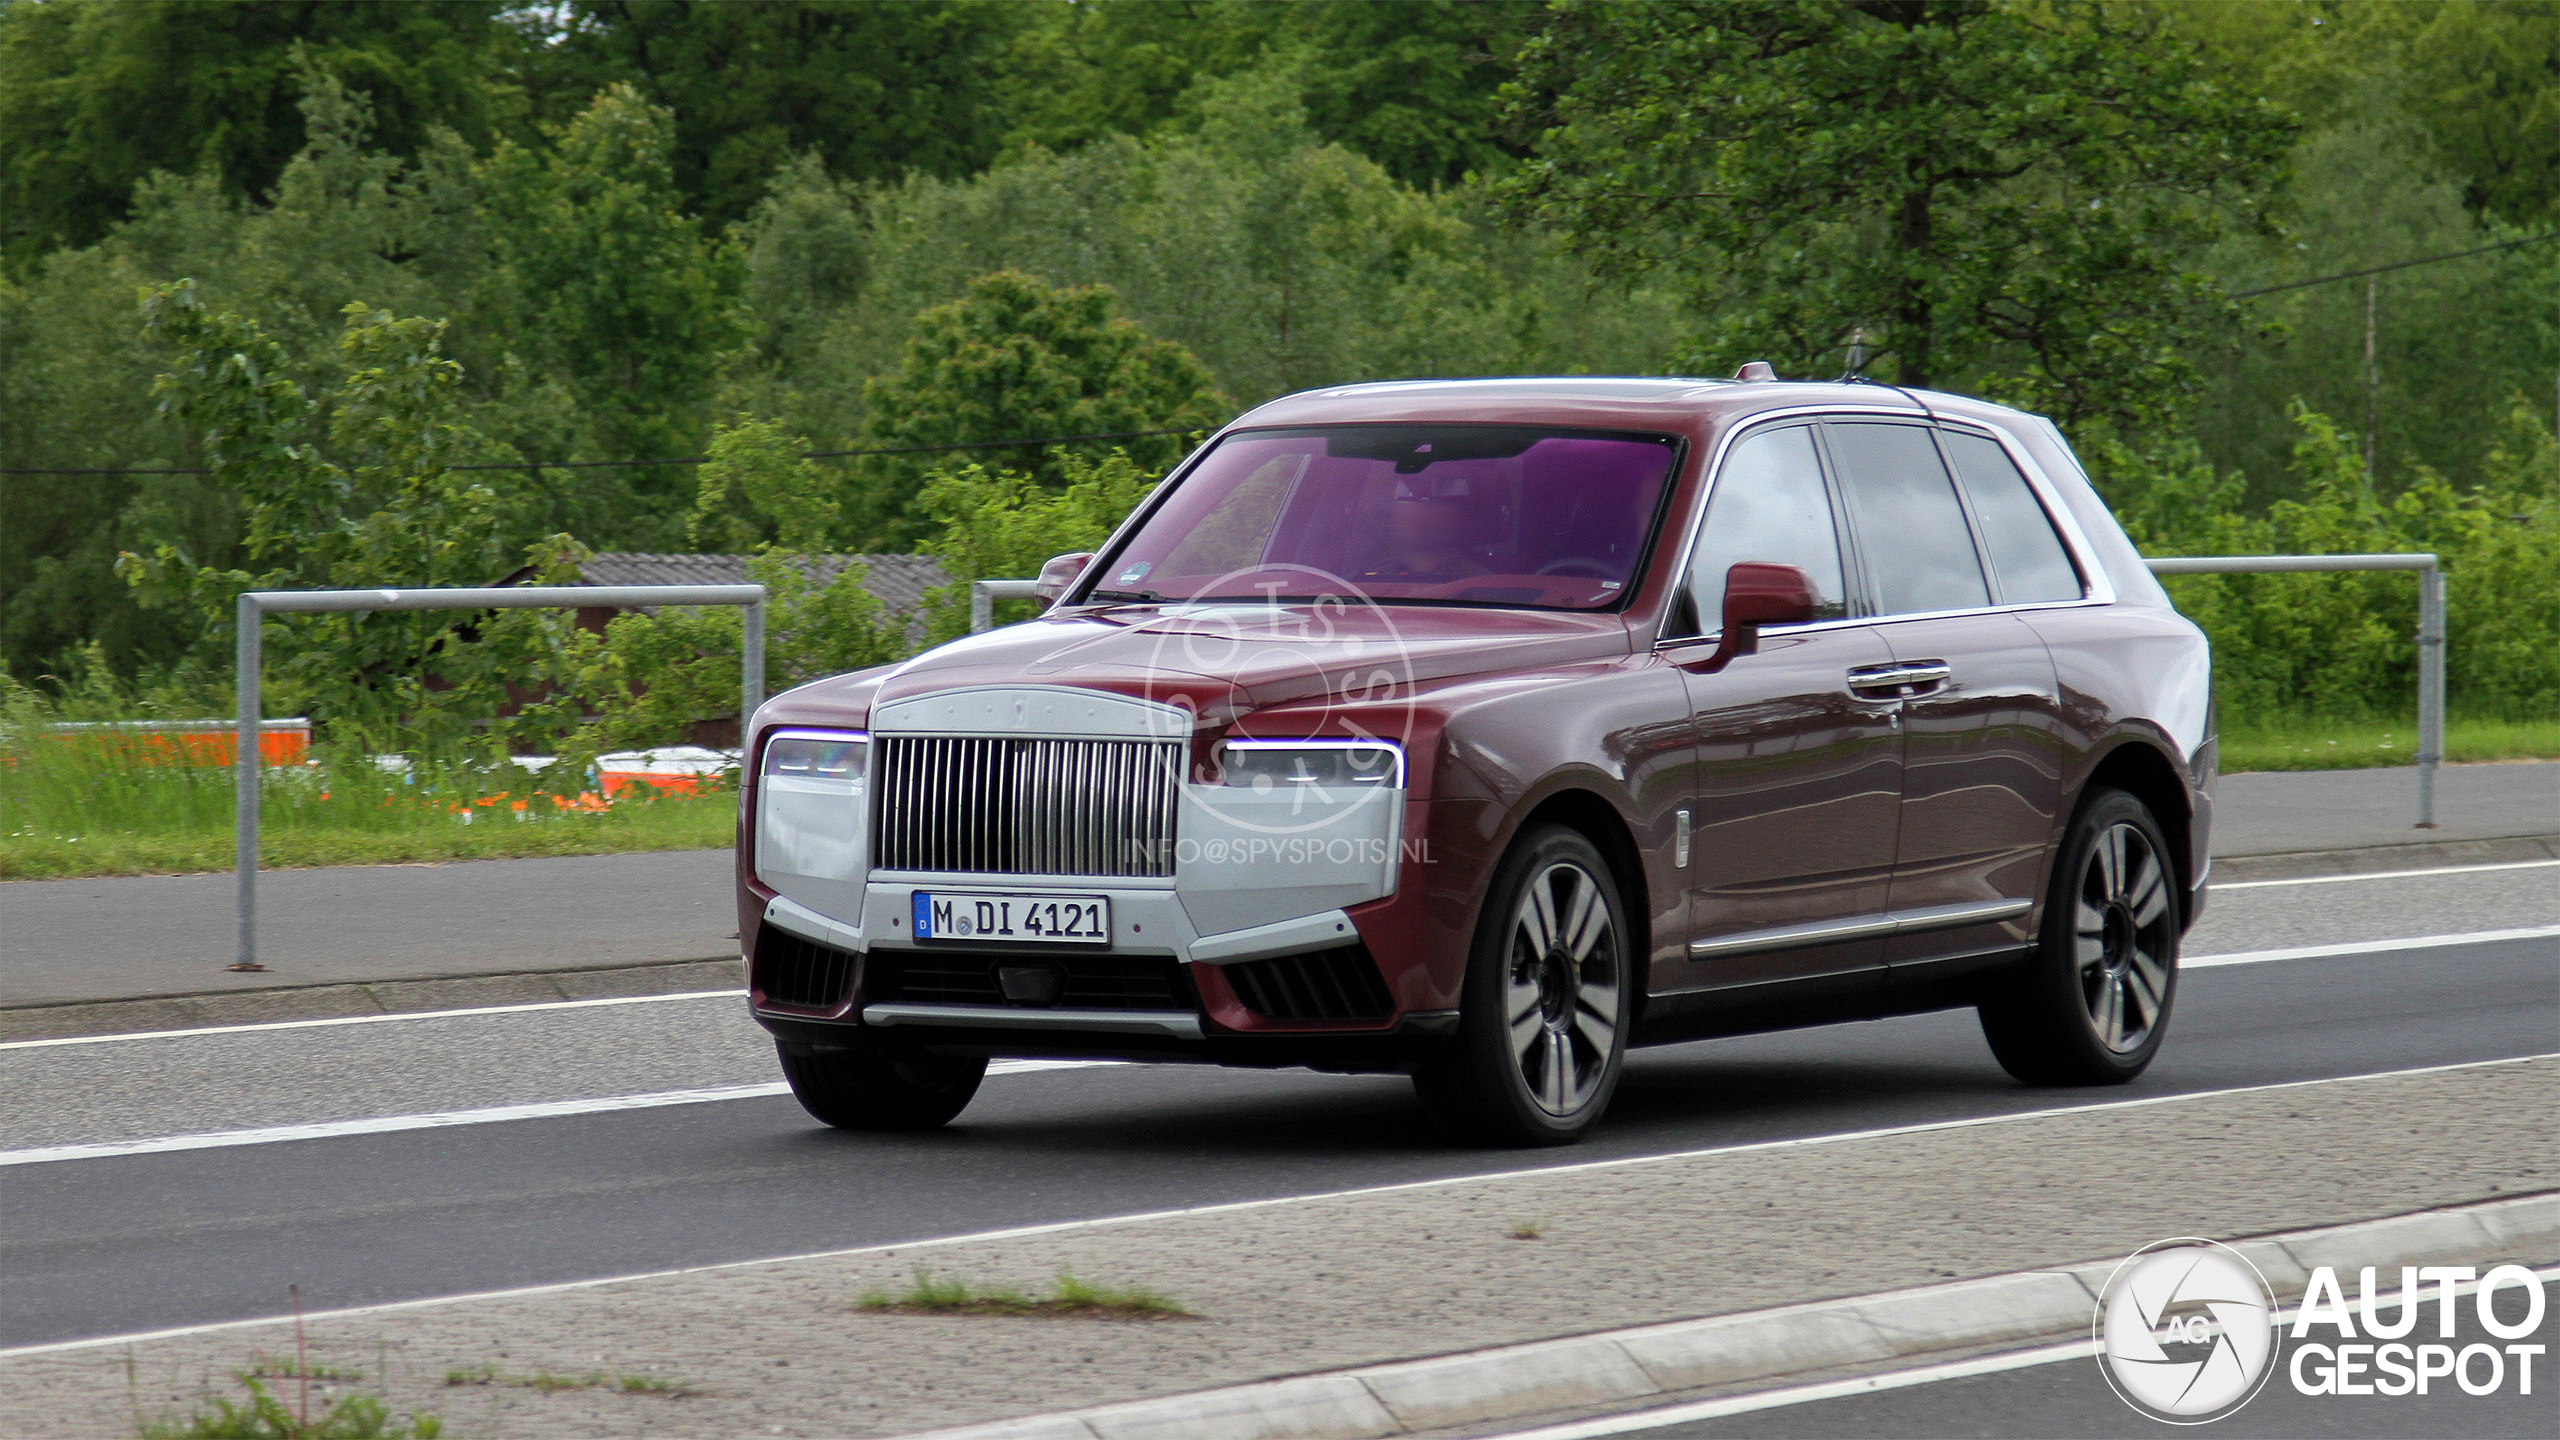 This is the first Cullinan Series II